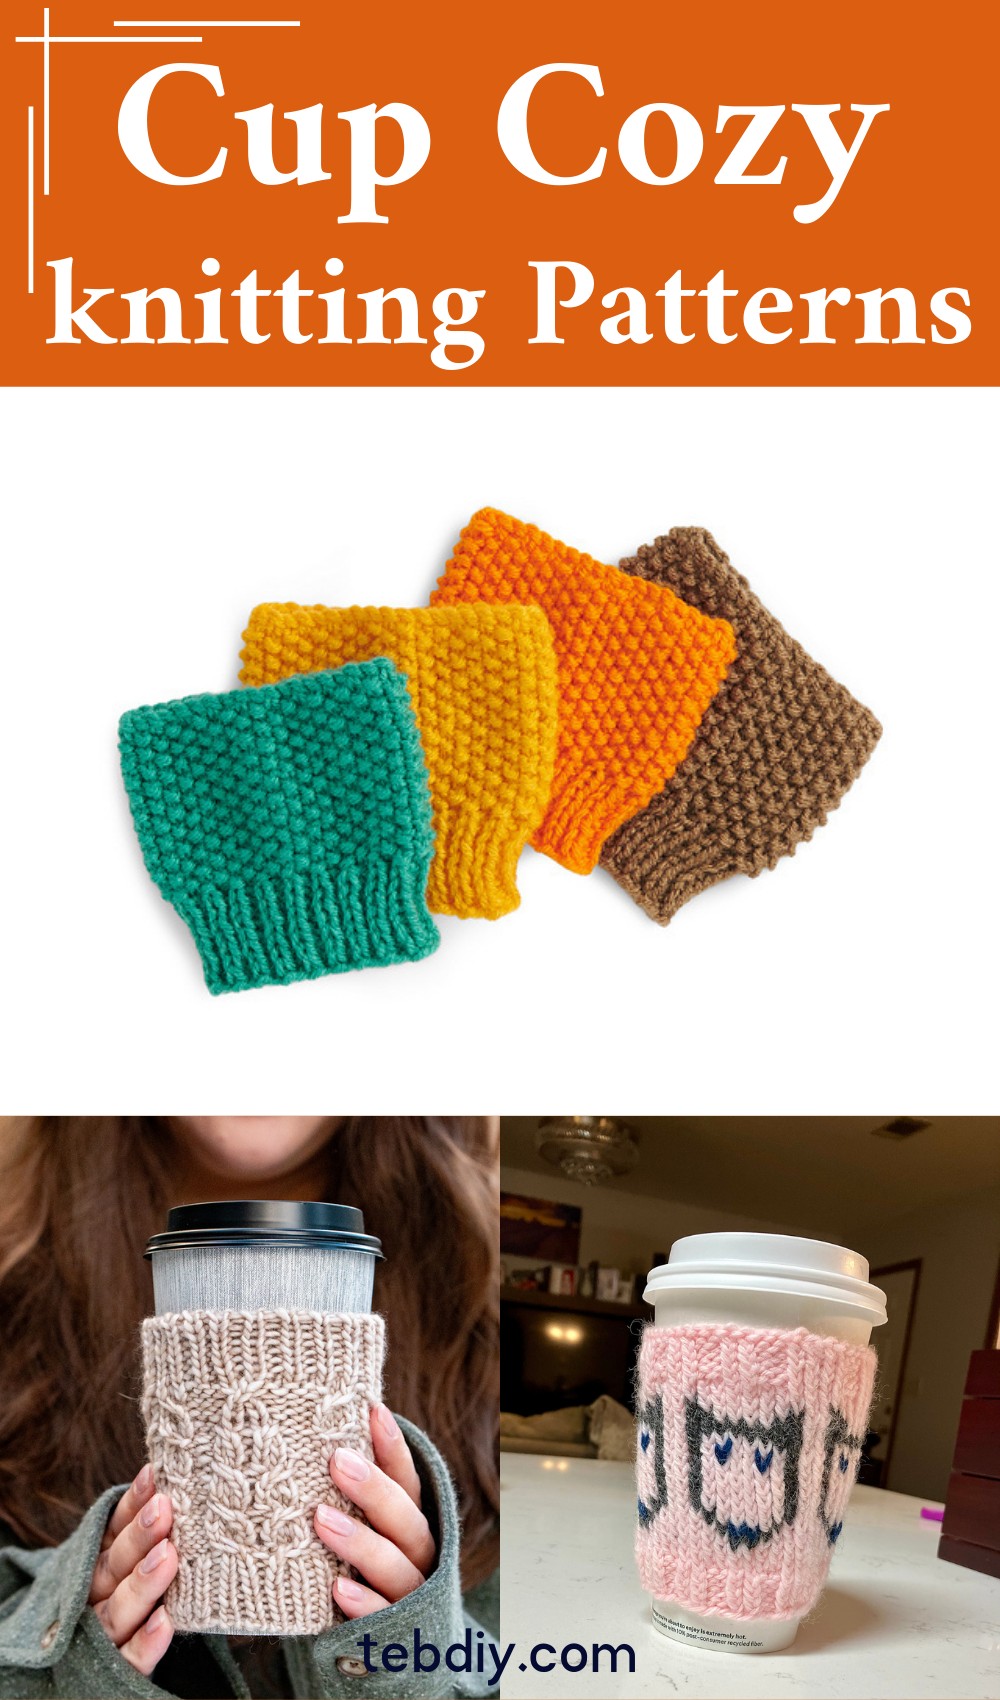 Knit Cup Cozy Patterns